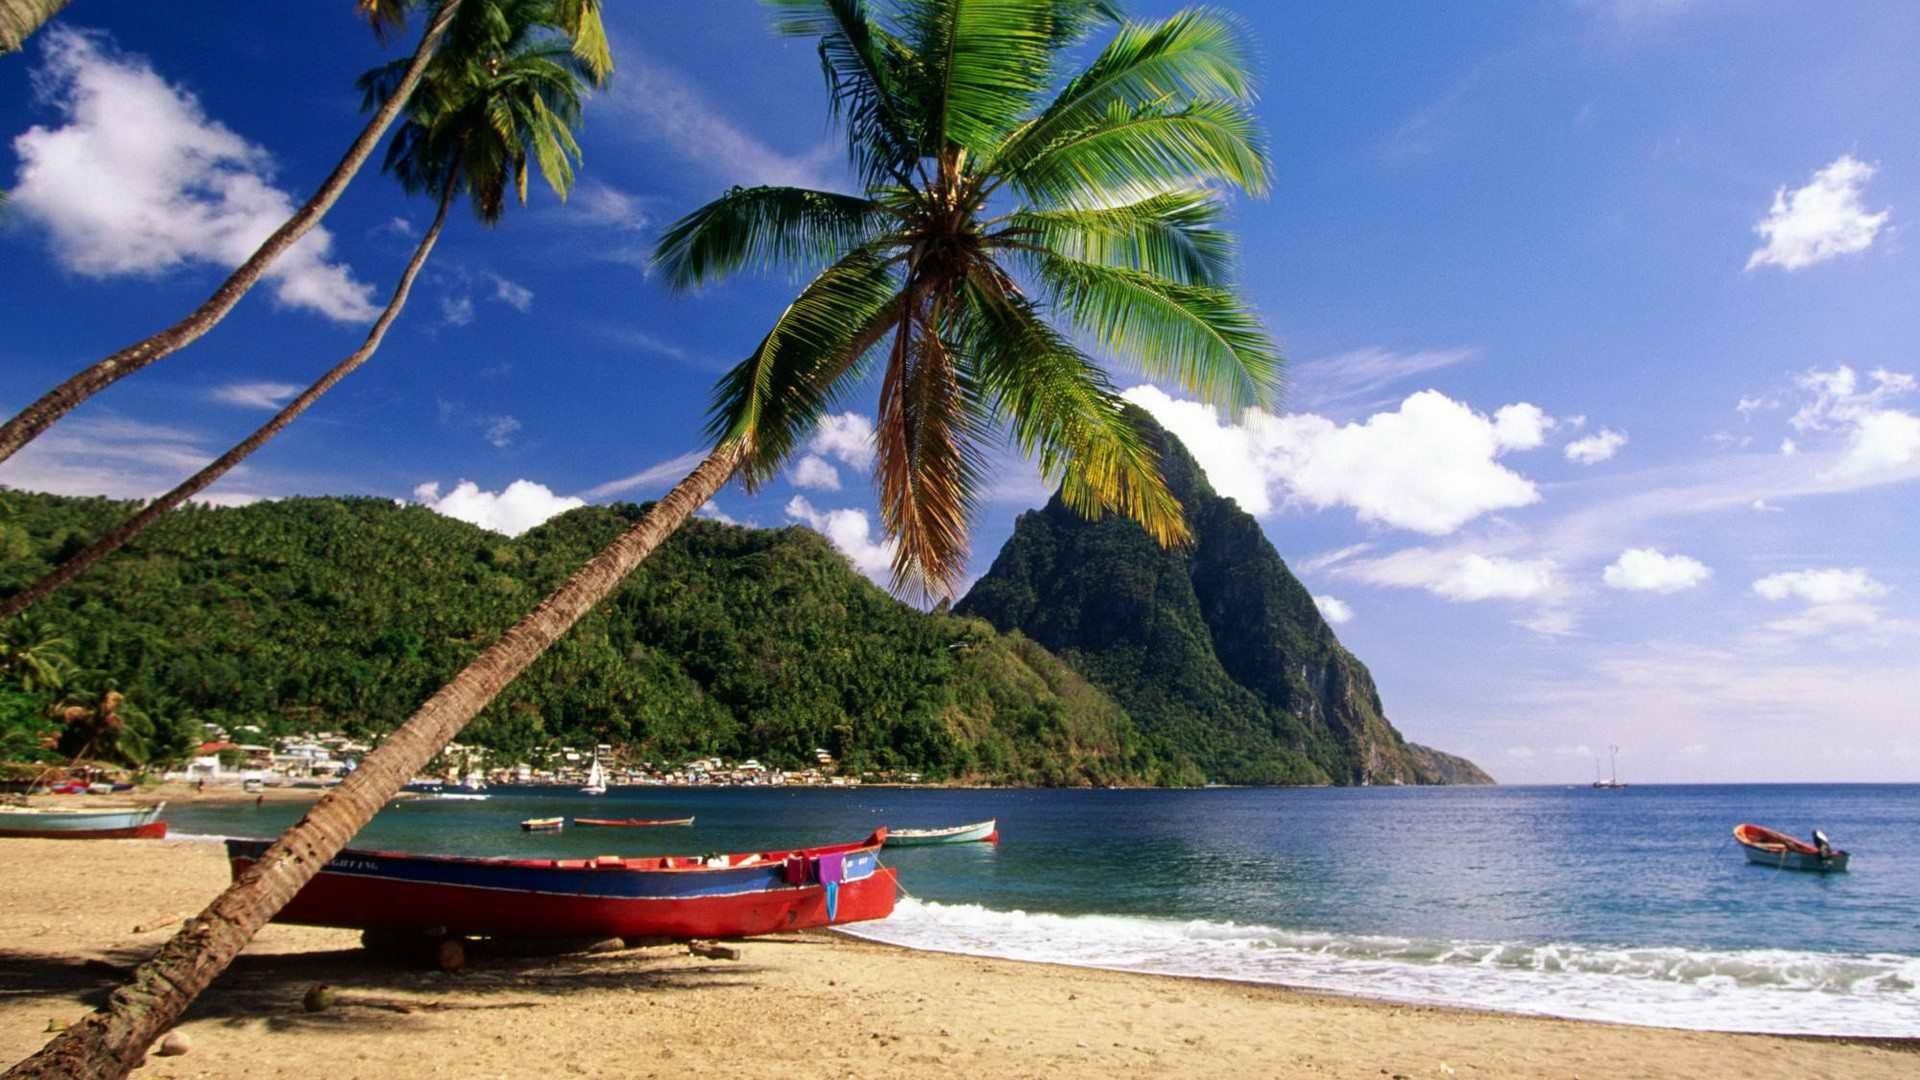 1920x1080  Caribbean Beach. How to set wallpaper on your desktop? Click the  download link from above and set the wallpaper on the desktop from your OS.